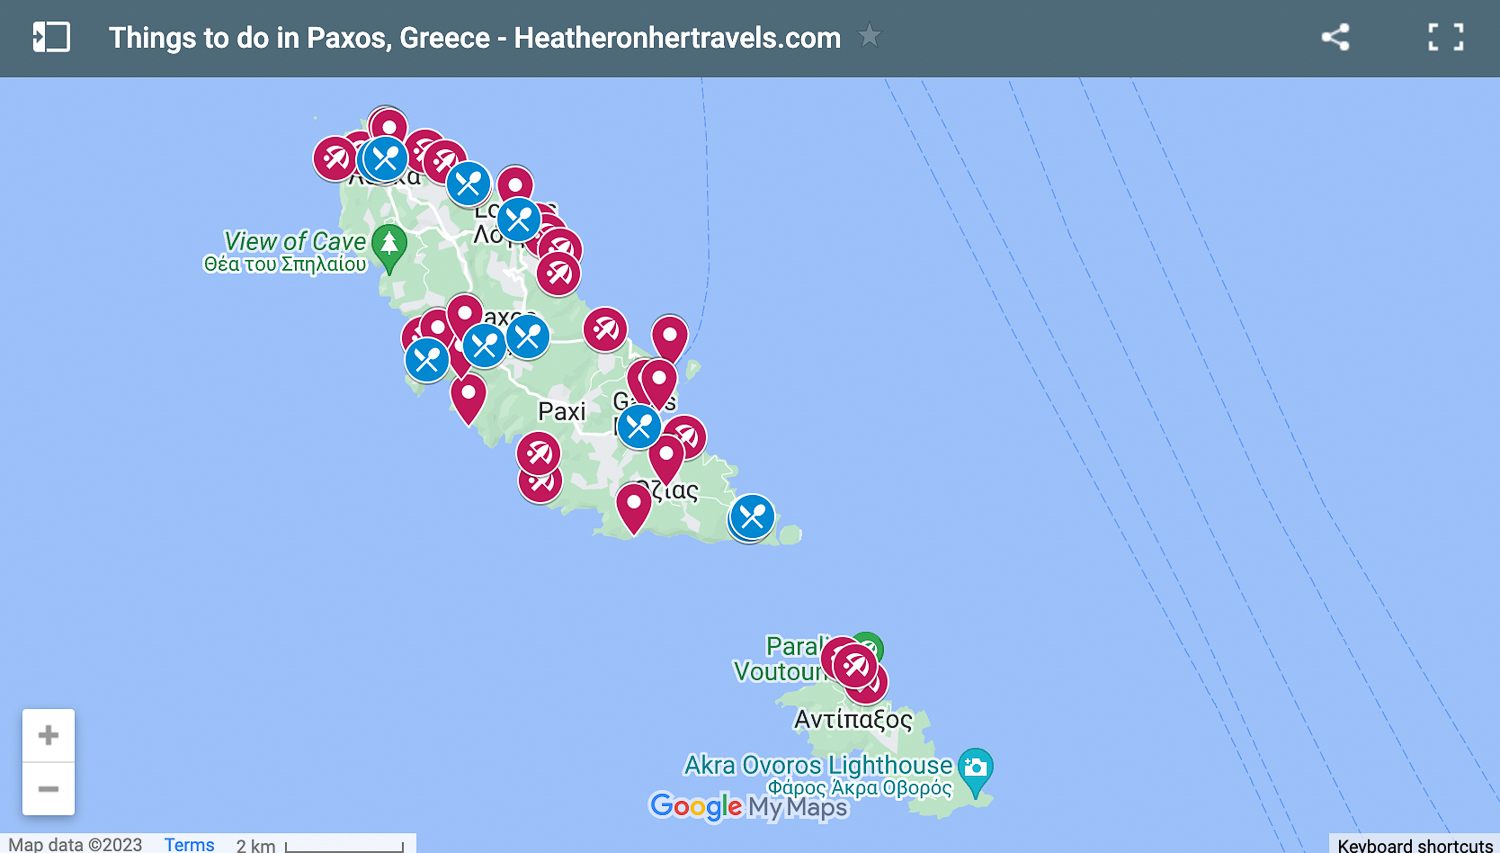 Map of things to do in Paxos Heatheronhertravels.com